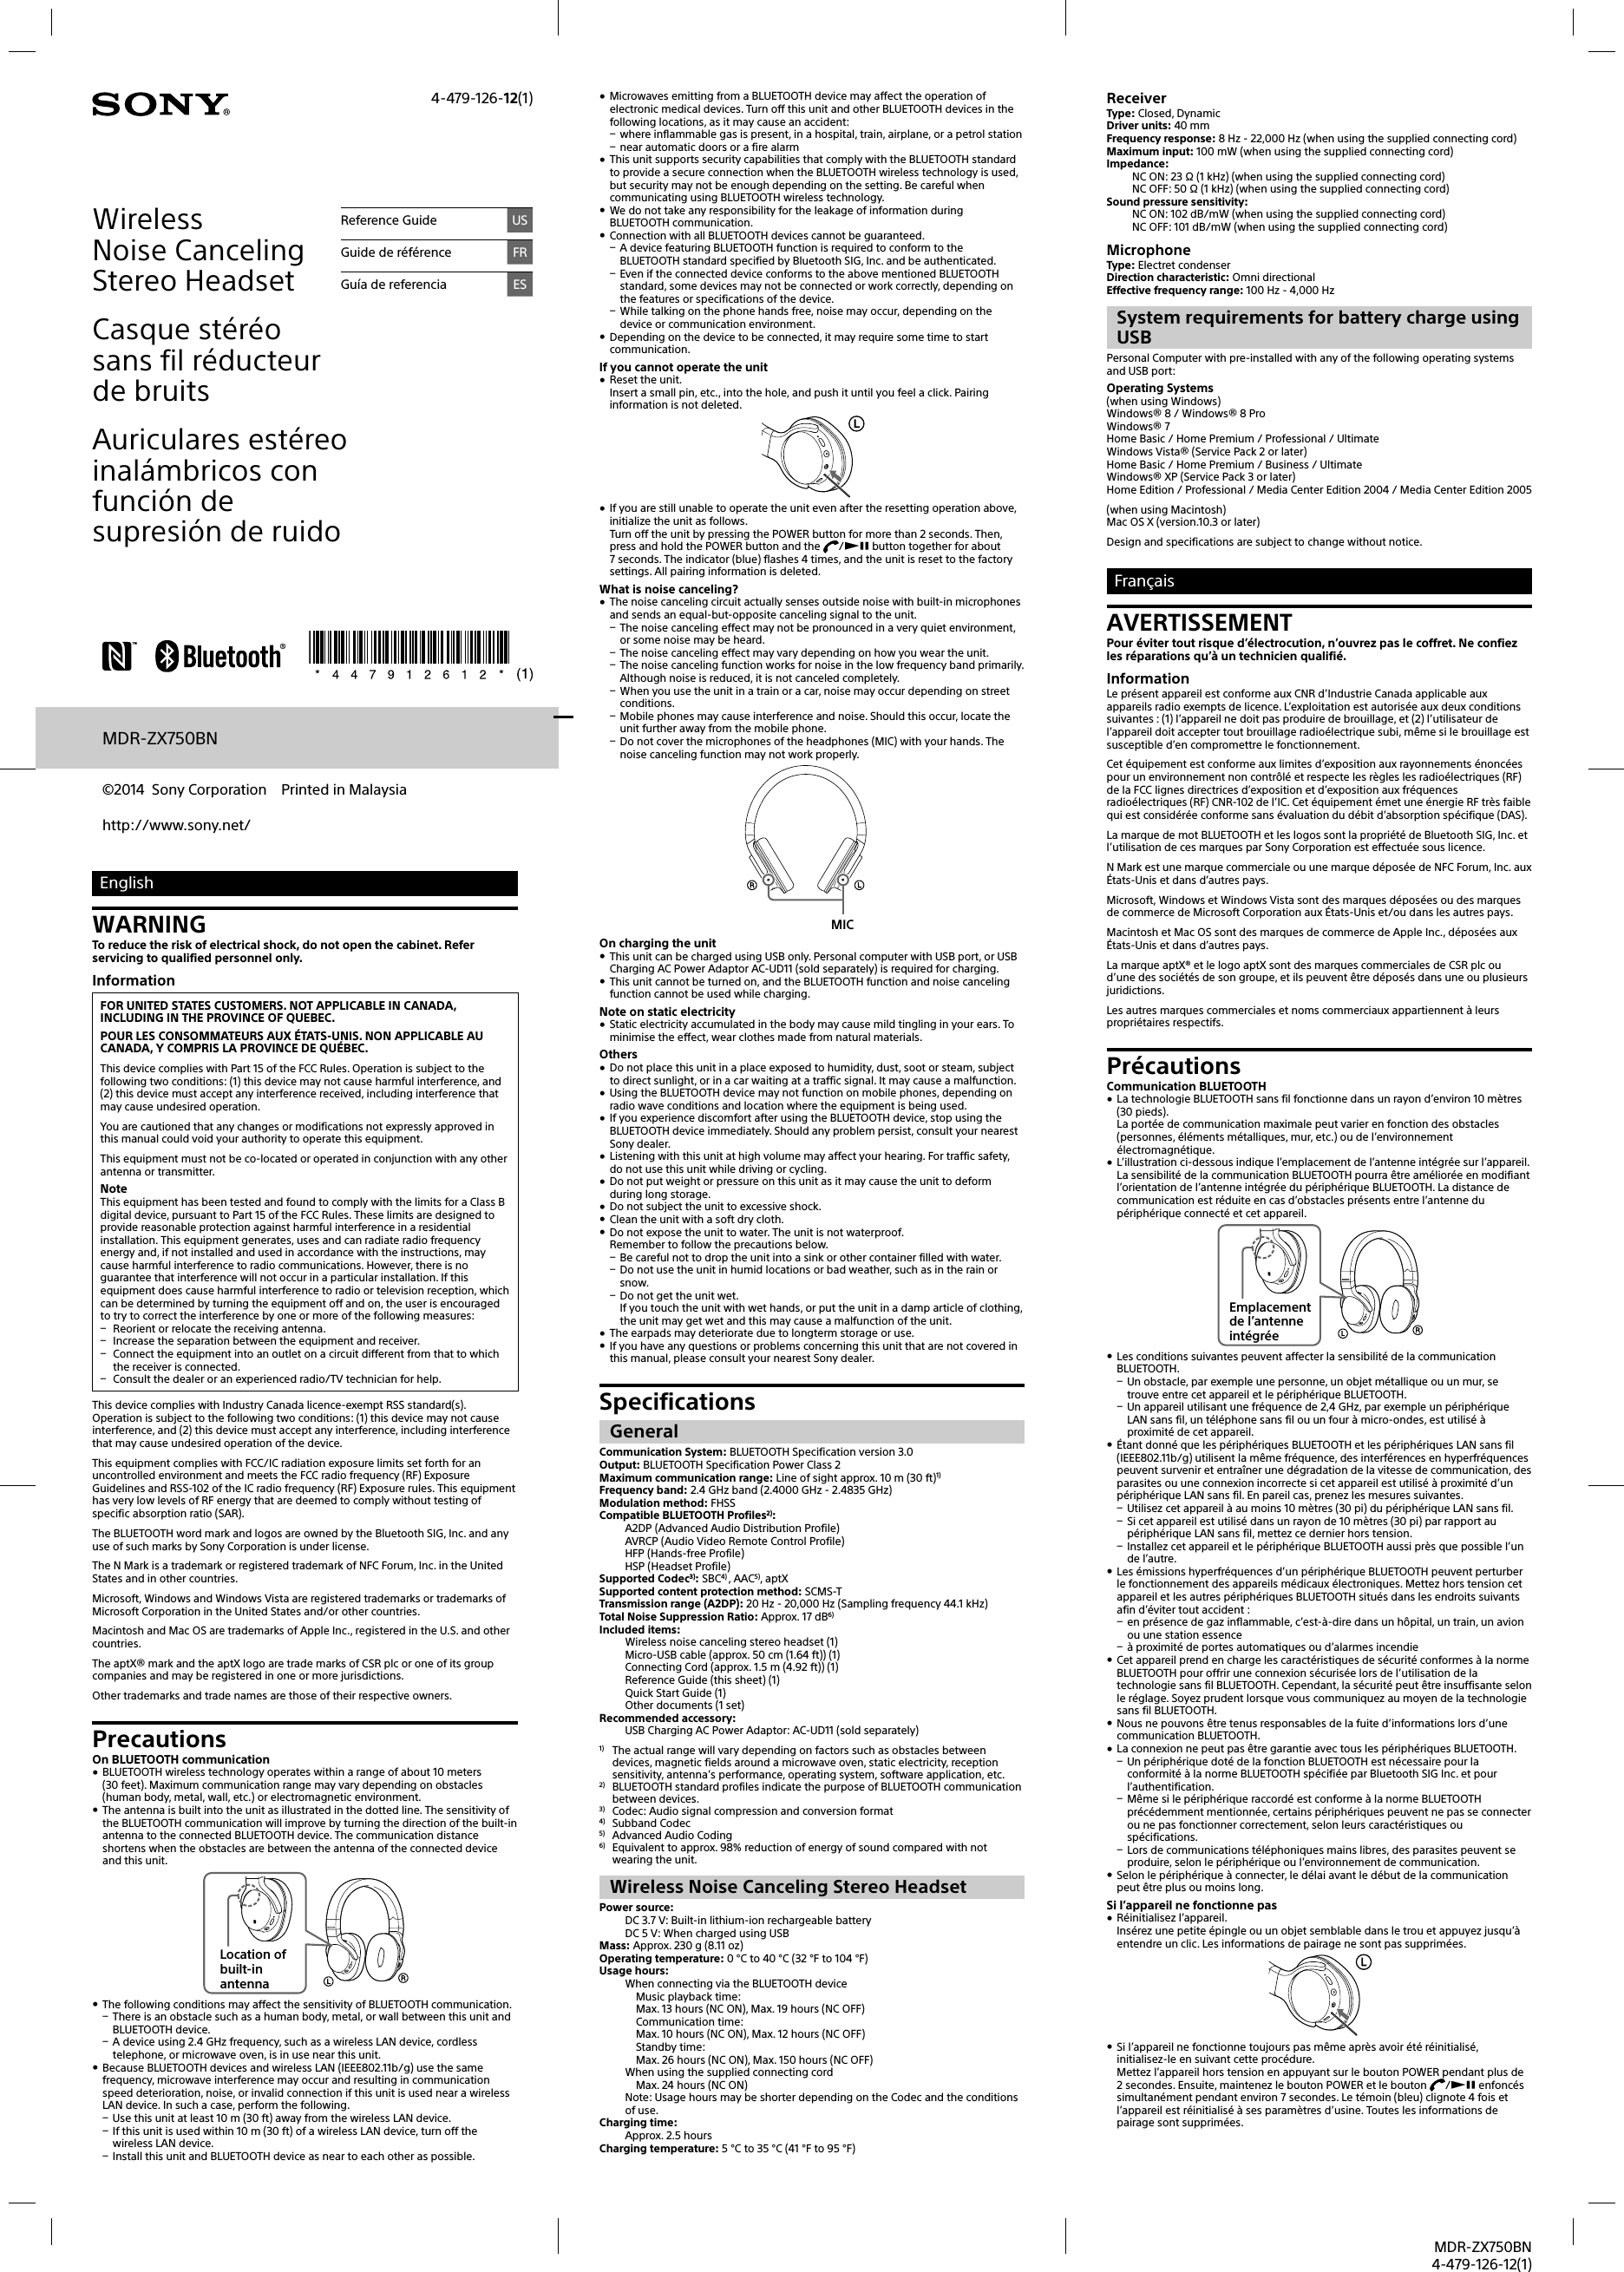 MDR-ZX750BN4-479-126-12(1)MDR-ZX750BNhttp://www.sony.net/©2014  Sony Corporation  Printed in MalaysiaEnglishWARNINGTo reduce the risk of electrical shock, do not open the cabinet. Refer servicing to qualified personnel only.InformationFOR UNITED STATES CUSTOMERS. NOT APPLICABLE IN CANADA, INCLUDING IN THE PROVINCE OF QUEBEC.POUR LES CONSOMMATEURS AUX ÉTATS-UNIS. NON APPLICABLE AU CANADA, Y COMPRIS LA PROVINCE DE QUÉBEC.This device complies with Part 15 of the FCC Rules. Operation is subject to the following two conditions: (1) this device may not cause harmful interference, and (2) this device must accept any interference received, including interference that may cause undesired operation.You are cautioned that any changes or modifications not expressly approved in this manual could void your authority to operate this equipment.This equipment must not be co-located or operated in conjunction with any other antenna or transmitter.NoteThis equipment has been tested and found to comply with the limits for a Class B digital device, pursuant to Part 15 of the FCC Rules. These limits are designed to provide reasonable protection against harmful interference in a residential installation. This equipment generates, uses and can radiate radio frequency energy and, if not installed and used in accordance with the instructions, may cause harmful interference to radio communications. However, there is no guarantee that interference will not occur in a particular installation. If this equipment does cause harmful interference to radio or television reception, which can be determined by turning the equipment off and on, the user is encouraged to try to correct the interference by one or more of the following measures: Reorient or relocate the receiving antenna. Increase the separation between the equipment and receiver. Connect the equipment into an outlet on a circuit different from that to which the receiver is connected. Consult the dealer or an experienced radio/TV technician for help.This device complies with Industry Canada licence-exempt RSS standard(s). Operation is subject to the following two conditions: (1) this device may not cause interference, and (2) this device must accept any interference, including interference that may cause undesired operation of the device.This equipment complies with FCC/IC radiation exposure limits set forth for an uncontrolled environment and meets the FCC radio frequency (RF) Exposure Guidelines and RSS-102 of the IC radio frequency (RF) Exposure rules. This equipment has very low levels of RF energy that are deemed to comply without testing of specific absorption ratio (SAR).The BLUETOOTH word mark and logos are owned by the Bluetooth SIG, Inc. and any use of such marks by Sony Corporation is under license.The N Mark is a trademark or registered trademark of NFC Forum, Inc. in the United States and in other countries.Microsoft, Windows and Windows Vista are registered trademarks or trademarks of Microsoft Corporation in the United States and/or other countries.Macintosh and Mac OS are trademarks of Apple Inc., registered in the U.S. and other countries. The aptX® mark and the aptX logo are trade marks of CSR plc or one of its group companies and may be registered in one or more jurisdictions.Other trademarks and trade names are those of their respective owners.PrecautionsOn BLUETOOTH communication BLUETOOTH wireless technology operates within a range of about 10 meters (30feet). Maximum communication range may vary depending on obstacles (human body, metal, wall, etc.) or electromagnetic environment. The antenna is built into the unit as illustrated in the dotted line. The sensitivity of the BLUETOOTH communication will improve by turning the direction of the built-in antenna to the connected BLUETOOTH device. The communication distance shortens when the obstacles are between the antenna of the connected device and this unit.Location of built-in antenna The following conditions may affect the sensitivity of BLUETOOTH communication. There is an obstacle such as a human body, metal, or wall between this unit and BLUETOOTH device. A device using 2.4 GHz frequency, such as a wireless LAN device, cordless telephone, or microwave oven, is in use near this unit. Because BLUETOOTH devices and wireless LAN (IEEE802.11b/g) use the same frequency, microwave interference may occur and resulting in communication speed deterioration, noise, or invalid connection if this unit is used near a wireless LAN device. In such a case, perform the following. Use this unit at least 10 m (30 ft) away from the wireless LAN device. If this unit is used within 10 m (30 ft) of a wireless LAN device, turn off the wireless LAN device. Install this unit and BLUETOOTH device as near to each other as possible. Microwaves emitting from a BLUETOOTH device may affect the operation of electronic medical devices. Turn off this unit and other BLUETOOTH devices in the following locations, as it may cause an accident: where inflammable gas is present, in a hospital, train, airplane, or a petrol station near automatic doors or a fire alarm This unit supports security capabilities that comply with the BLUETOOTH standard to provide a secure connection when the BLUETOOTH wireless technology is used, but security may not be enough depending on the setting. Be careful when communicating using BLUETOOTH wireless technology. We do not take any responsibility for the leakage of information during BLUETOOTH communication. Connection with all BLUETOOTH devices cannot be guaranteed. A device featuring BLUETOOTH function is required to conform to the BLUETOOTH standard specified by Bluetooth SIG, Inc. and be authenticated. Even if the connected device conforms to the above mentioned BLUETOOTH standard, some devices may not be connected or work correctly, depending on the features or specifications of the device. While talking on the phone hands free, noise may occur, depending on the device or communication environment. Depending on the device to be connected, it may require some time to start communication.If you cannot operate the unit Reset the unit.Insert a small pin, etc., into the hole, and push it until you feel a click. Pairing information is not deleted. If you are still unable to operate the unit even after the resetting operation above, initialize the unit as follows.Turn off the unit by pressing the POWER button for more than 2seconds. Then, press and hold the POWER button and the  / button together for about 7seconds. The indicator (blue) flashes 4times, and the unit is reset to the factory settings. All pairing information is deleted.What is noise canceling? The noise canceling circuit actually senses outside noise with built-in microphones and sends an equal-but-opposite canceling signal to the unit. The noise canceling effect may not be pronounced in a very quiet environment, or some noise may be heard. The noise canceling effect may vary depending on how you wear the unit. The noise canceling function works for noise in the low frequency band primarily. Although noise is reduced, it is not canceled completely. When you use the unit in a train or a car, noise may occur depending on street conditions. Mobile phones may cause interference and noise. Should this occur, locate the unit further away from the mobile phone. Do not cover the microphones of the headphones (MIC) with your hands. The noise canceling function may not work properly.MICOn charging the unit This unit can be charged using USB only. Personal computer with USB port, or USB Charging AC Power Adaptor AC-UD11 (sold separately) is required for charging. This unit cannot be turned on, and the BLUETOOTH function and noise canceling function cannot be used while charging.Note on static electricity Static electricity accumulated in the body may cause mild tingling in your ears. To minimise the effect, wear clothes made from natural materials.Others Do not place this unit in a place exposed to humidity, dust, soot or steam, subject to direct sunlight, or in a car waiting at a traffic signal. It may cause a malfunction. Using the BLUETOOTH device may not function on mobile phones, depending on radio wave conditions and location where the equipment is being used. If you experience discomfort after using the BLUETOOTH device, stop using the BLUETOOTH device immediately. Should any problem persist, consult your nearest Sony dealer. Listening with this unit at high volume may affect your hearing. For traffic safety, do not use this unit while driving or cycling. Do not put weight or pressure on this unit as it may cause the unit to deform during long storage. Do not subject the unit to excessive shock. Clean the unit with a soft dry cloth. Do not expose the unit to water. The unit is not waterproof.Remember to follow the precautions below. Be careful not to drop the unit into a sink or other container filled with water. Do not use the unit in humid locations or bad weather, such as in the rain or snow. Do not get the unit wet.If you touch the unit with wet hands, or put the unit in a damp article of clothing, the unit may get wet and this may cause a malfunction of the unit. The earpads may deteriorate due to longterm storage or use. If you have any questions or problems concerning this unit that are not covered in this manual, please consult your nearest Sony dealer.SpecificationsGeneralCommunication System: BLUETOOTH Specification version 3.0Output: BLUETOOTH Specification Power Class 2Maximum communication range: Line of sight approx. 10 m (30 ft)1)Frequency band: 2.4 GHz band (2.4000 GHz - 2.4835 GHz)Modulation method: FHSSCompatible BLUETOOTH Profiles2): A2DP (Advanced Audio Distribution Profile)AVRCP (Audio Video Remote Control Profile)HFP (Hands-free Profile)HSP (Headset Profile)Supported Codec3): SBC4) , AAC5), aptXSupported content protection method: SCMS-TTransmission range (A2DP): 20 Hz - 20,000 Hz (Sampling frequency 44.1 kHz)Total Noise Suppression Ratio: Approx. 17dB6)Included items: Wireless noise canceling stereo headset (1)Micro-USB cable (approx. 50 cm (1.64 ft)) (1)Connecting Cord (approx. 1.5 m (4.92 ft)) (1) Reference Guide (this sheet) (1)Quick Start Guide (1)Other documents (1 set)Recommended accessory: USB Charging AC Power Adaptor: AC-UD11 (sold separately)1)  The actual range will vary depending on factors such as obstacles between devices, magnetic fields around a microwave oven, static electricity, reception sensitivity, antenna’s performance, operating system, software application, etc.2)  BLUETOOTH standard profiles indicate the purpose of BLUETOOTH communication between devices.3)  Codec: Audio signal compression and conversion format4)  Subband Codec5)  Advanced Audio Coding6)  Equivalent to approx. 98% reduction of energy of sound compared with not wearing the unit.Wireless Noise Canceling Stereo HeadsetPower source: DC 3.7 V: Built-in lithium-ion rechargeable batteryDC 5 V: When charged using USBMass: Approx. 230 g (8.11 oz)Operating temperature: 0 °C to 40 °C (32 °F to 104 °F)Usage hours: When connecting via the BLUETOOTH device  Music playback time:   Max. 13 hours (NC ON), Max. 19 hours (NC OFF)  Communication time:  Max. 10 hours (NC ON), Max. 12 hours (NC OFF)  Standby time:  Max. 26 hours (NC ON), Max. 150 hours (NC OFF)When using the supplied connecting cord  Max. 24 hours (NC ON)Note: Usage hours may be shorter depending on the Codec and the conditions of use.Charging time: Approx. 2.5 hoursCharging temperature: 5 °C to 35 °C (41 °F to 95 °F)Wireless Noise Canceling Stereo HeadsetCasque stéréo sans fil réducteur de bruitsAuriculares estéreo inalámbricos con función de supresión de ruidoReference Guide USGuide de référence FRGuía de referencia ES4-479-126-12(1) ReceiverType: Closed, DynamicDriver units: 40 mmFrequency response: 8 Hz - 22,000 Hz (when using the supplied connecting cord)Maximum input: 100 mW (when using the supplied connecting cord)Impedance:NC ON: 23 Ω (1 kHz) (when using the supplied connecting cord)NC OFF: 50 Ω (1 kHz) (when using the supplied connecting cord)Sound pressure sensitivity:NC ON: 102 dB/mW (when using the supplied connecting cord)NC OFF: 101 dB/mW (when using the supplied connecting cord)MicrophoneType: Electret condenserDirection characteristic: Omni directionalEffective frequency range: 100 Hz - 4,000 HzSystem requirements for battery charge using USBPersonal Computer with pre-installed with any of the following operating systems and USB port: Operating Systems(when using Windows)Windows® 8/ Windows® 8 ProWindows® 7Home Basic / Home Premium / Professional / UltimateWindows Vista® (Service Pack 2 or later)Home Basic / Home Premium / Business / UltimateWindows® XP (Service Pack 3 or later)Home Edition / Professional / Media Center Edition 2004 / Media Center Edition 2005(when using Macintosh)Mac OS X (version.10.3 or later)Design and specifications are subject to change without notice.FrançaisAVERTISSEMENTPour éviter tout risque d’électrocution, n’ouvrez pas le coffret. Ne confiez les réparations qu’à un technicien qualifié.InformationLe présent appareil est conforme aux CNR d’Industrie Canada applicable aux appareils radio exempts de licence. L’exploitation est autorisée aux deux conditions suivantes : (1) l’appareil ne doit pas produire de brouillage, et (2) l’utilisateur de l’appareil doit accepter tout brouillage radioélectrique subi, même si le brouillage est susceptible d’en compromettre le fonctionnement.Cet équipement est conforme aux limites d’exposition aux rayonnements énoncées pour un environnement non contrôlé et respecte les règles les radioélectriques (RF) de la FCC lignes directrices d’exposition et d’exposition aux fréquences radioélectriques (RF) CNR-102 de l’IC. Cet équipement émet une énergie RF très faible qui est considérée conforme sans évaluation du débit d’absorption spécifique (DAS).La marque de mot BLUETOOTH et les logos sont la propriété de Bluetooth SIG, Inc. et l’utilisation de ces marques par Sony Corporation est effectuée sous licence.N Mark est une marque commerciale ou une marque déposée de NFC Forum, Inc. aux États-Unis et dans d’autres pays.Microsoft, Windows et Windows Vista sont des marques déposées ou des marques de commerce de Microsoft Corporation aux États-Unis et/ou dans les autres pays.Macintosh et Mac OS sont des marques de commerce de Apple Inc., déposées aux États-Unis et dans d’autres pays.La marque aptX® et le logo aptX sont des marques commerciales de CSR plc ou d’une des sociétés de son groupe, et ils peuvent être déposés dans une ou plusieurs juridictions.Les autres marques commerciales et noms commerciaux appartiennent à leurs propriétaires respectifs.PrécautionsCommunication BLUETOOTH La technologie BLUETOOTH sans fil fonctionne dans un rayon d’environ 10 mètres (30 pieds). La portée de communication maximale peut varier en fonction des obstacles (personnes, éléments métalliques, mur, etc.) ou de l’environnement électromagnétique. L’illustration ci-dessous indique l’emplacement de l’antenne intégrée sur l’appareil. La sensibilité de la communication BLUETOOTH pourra être améliorée en modifiant l’orientation de l’antenne intégrée du périphérique BLUETOOTH. La distance de communication est réduite en cas d’obstacles présents entre l’antenne du périphérique connecté et cet appareil.Emplacement de l’antenne intégrée Les conditions suivantes peuvent affecter la sensibilité de la communication BLUETOOTH. Un obstacle, par exemple une personne, un objet métallique ou un mur, se trouve entre cet appareil et le périphérique BLUETOOTH. Un appareil utilisant une fréquence de 2,4 GHz, par exemple un périphérique LAN sans fil, un téléphone sans fil ou un four à micro-ondes, est utilisé à proximité de cet appareil. Étant donné que les périphériques BLUETOOTH et les périphériques LAN sans fil (IEEE802.11b/g) utilisent la même fréquence, des interférences en hyperfréquences peuvent survenir et entraîner une dégradation de la vitesse de communication, des parasites ou une connexion incorrecte si cet appareil est utilisé à proximité d’un périphérique LAN sans fil. En pareil cas, prenez les mesures suivantes. Utilisez cet appareil à au moins 10 mètres (30 pi) du périphérique LAN sans fil. Si cet appareil est utilisé dans un rayon de 10 mètres (30pi) par rapport au périphérique LAN sans fil, mettez ce dernier hors tension. Installez cet appareil et le périphérique BLUETOOTH aussi près que possible l’un de l’autre. Les émissions hyperfréquences d’un périphérique BLUETOOTH peuvent perturber le fonctionnement des appareils médicaux électroniques. Mettez hors tension cet appareil et les autres périphériques BLUETOOTH situés dans les endroits suivants afin d’éviter tout accident: en présence de gaz inflammable, c’est-à-dire dans un hôpital, un train, un avion ou une station essence à proximité de portes automatiques ou d’alarmes incendie Cet appareil prend en charge les caractéristiques de sécurité conformes à la norme BLUETOOTH pour offrir une connexion sécurisée lors de l’utilisation de la technologie sans fil BLUETOOTH. Cependant, la sécurité peut être insuffisante selon le réglage. Soyez prudent lorsque vous communiquez au moyen de la technologie sans fil BLUETOOTH. Nous ne pouvons être tenus responsables de la fuite d’informations lors d’une communication BLUETOOTH. La connexion ne peut pas être garantie avec tous les périphériques BLUETOOTH. Un périphérique doté de la fonction BLUETOOTH est nécessaire pour la conformité à la norme BLUETOOTH spécifiée par Bluetooth SIG Inc. et pour l’authentification. Même si le périphérique raccordé est conforme à la norme BLUETOOTH précédemment mentionnée, certains périphériques peuvent ne pas se connecter ou ne pas fonctionner correctement, selon leurs caractéristiques ou spécifications. Lors de communications téléphoniques mains libres, des parasites peuvent se produire, selon le périphérique ou l’environnement de communication. Selon le périphérique à connecter, le délai avant le début de la communication peut être plus ou moins long.Si l’appareil ne fonctionne pas Réinitialisez l’appareil.Insérez une petite épingle ou un objet semblable dans le trou et appuyez jusqu’à entendre un clic. Les informations de pairage ne sont pas supprimées. Si l’appareil ne fonctionne toujours pas même après avoir été réinitialisé, initialisez-le en suivant cette procédure.Mettez l’appareil hors tension en appuyant sur le boutonPOWER pendant plus de 2 secondes. Ensuite, maintenez le boutonPOWER et le bouton  / enfoncés simultanément pendant environ 7 secondes. Le témoin (bleu) clignote 4fois et l’appareil est réinitialisé à ses paramètres d’usine. Toutes les informations de pairage sont supprimées.